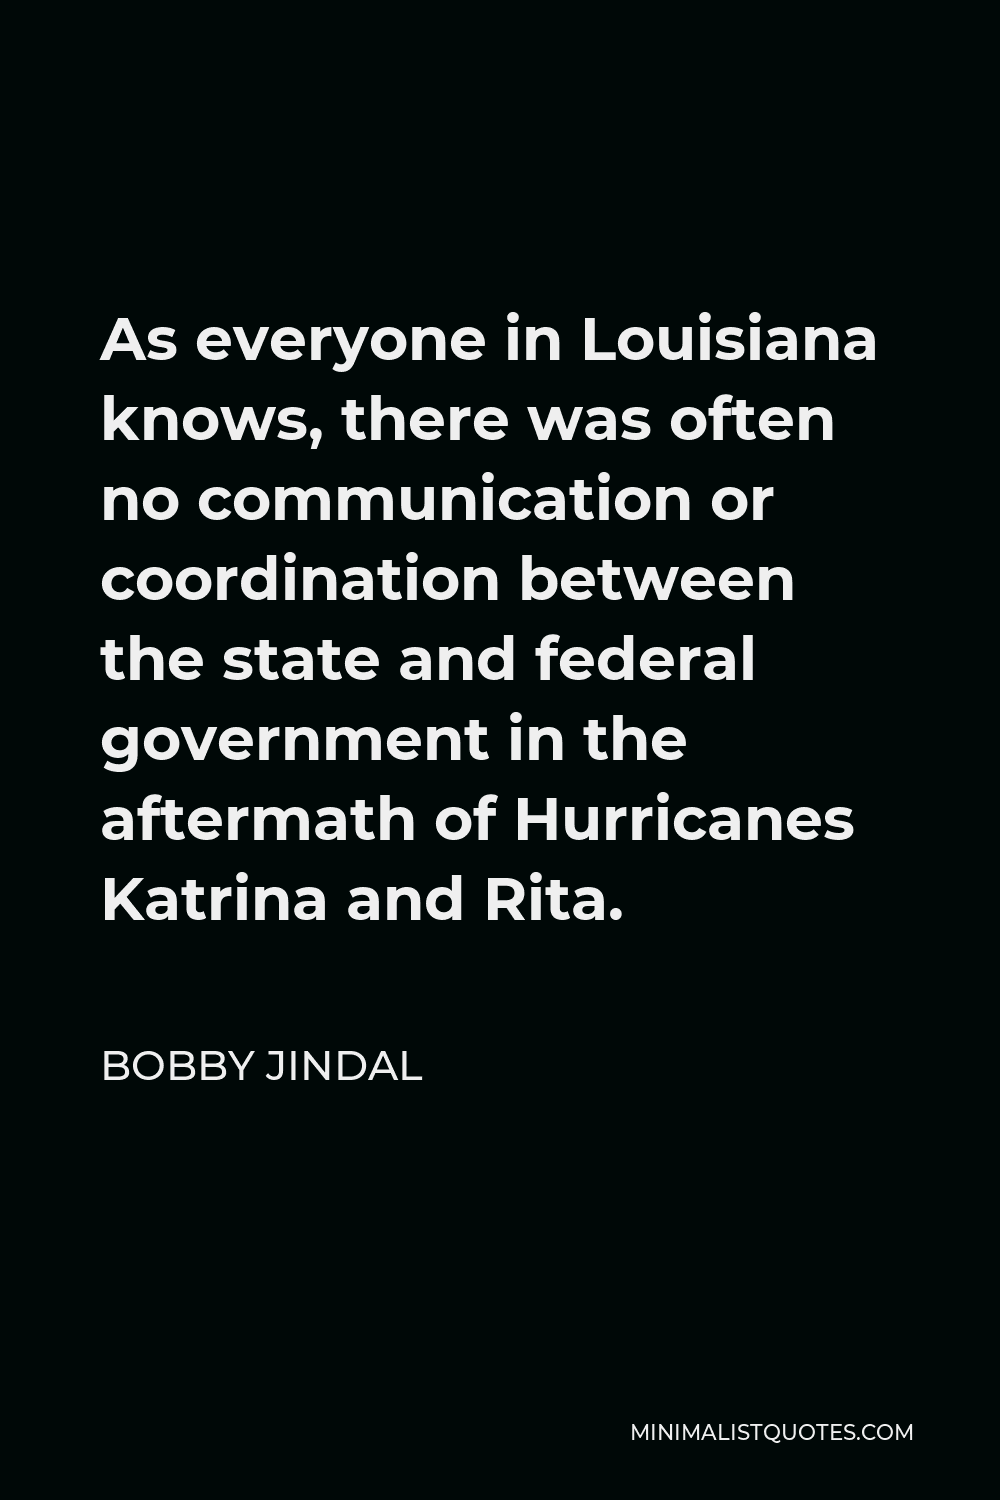 Bobby Jindal Quote - As everyone in Louisiana knows, there was often no communication or coordination between the state and federal government in the aftermath of Hurricanes Katrina and Rita.